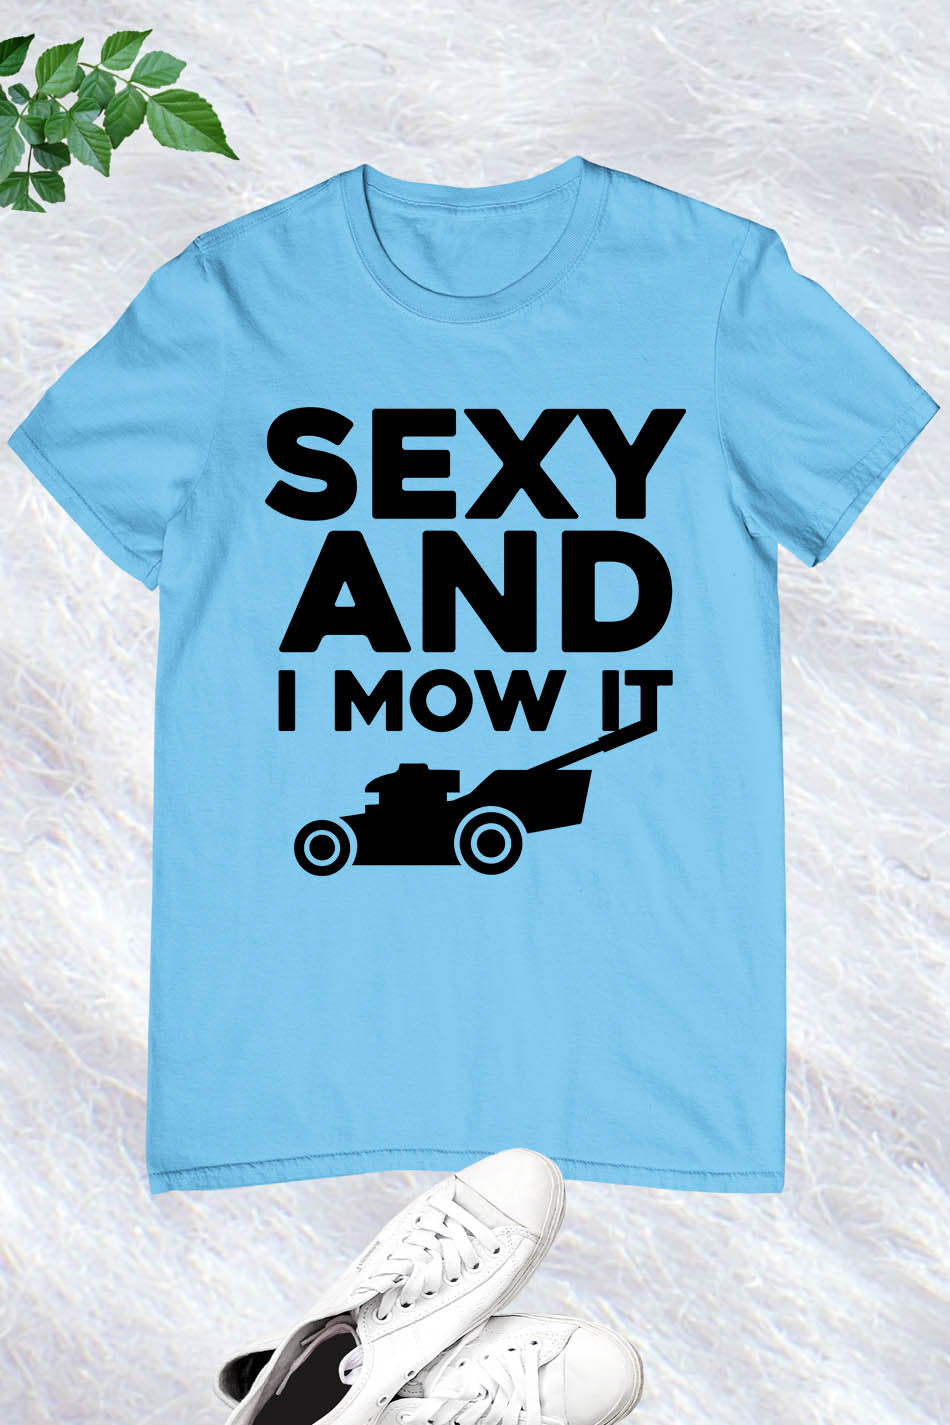 Sexy And I Mow It Funny Men's Gardening T Shirt